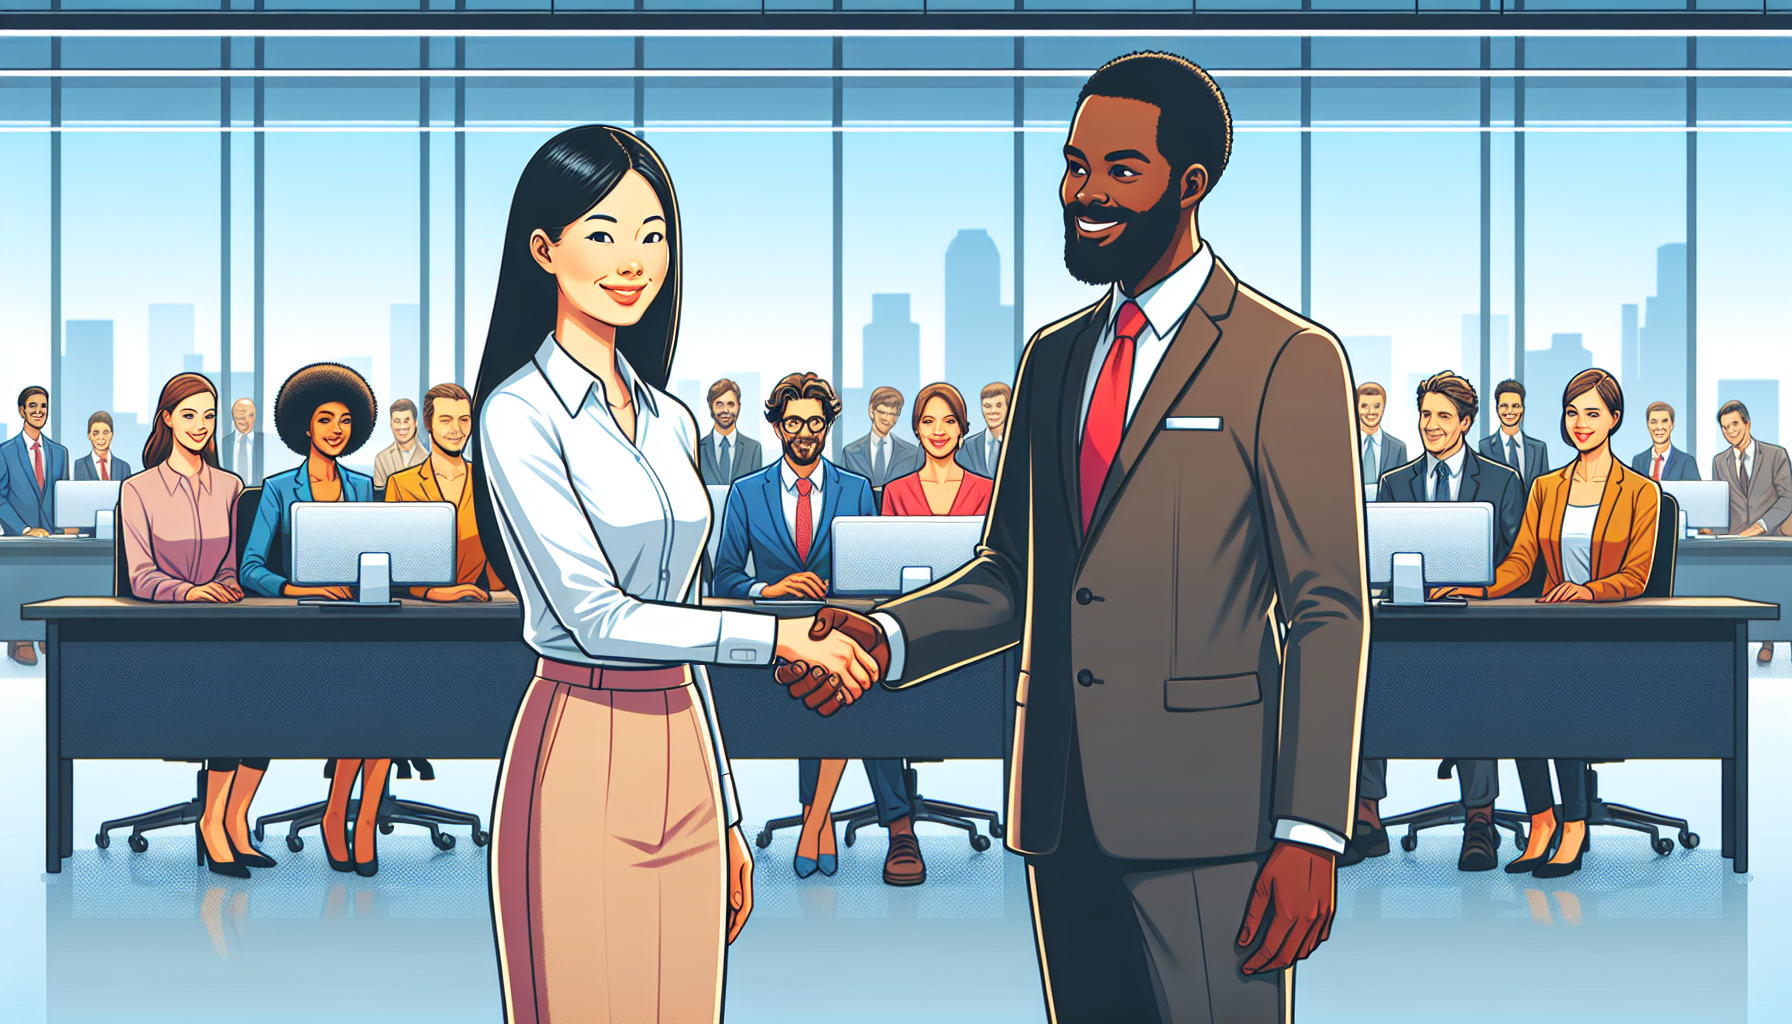 Illustration of a welcoming handshake between a new employee and a manager